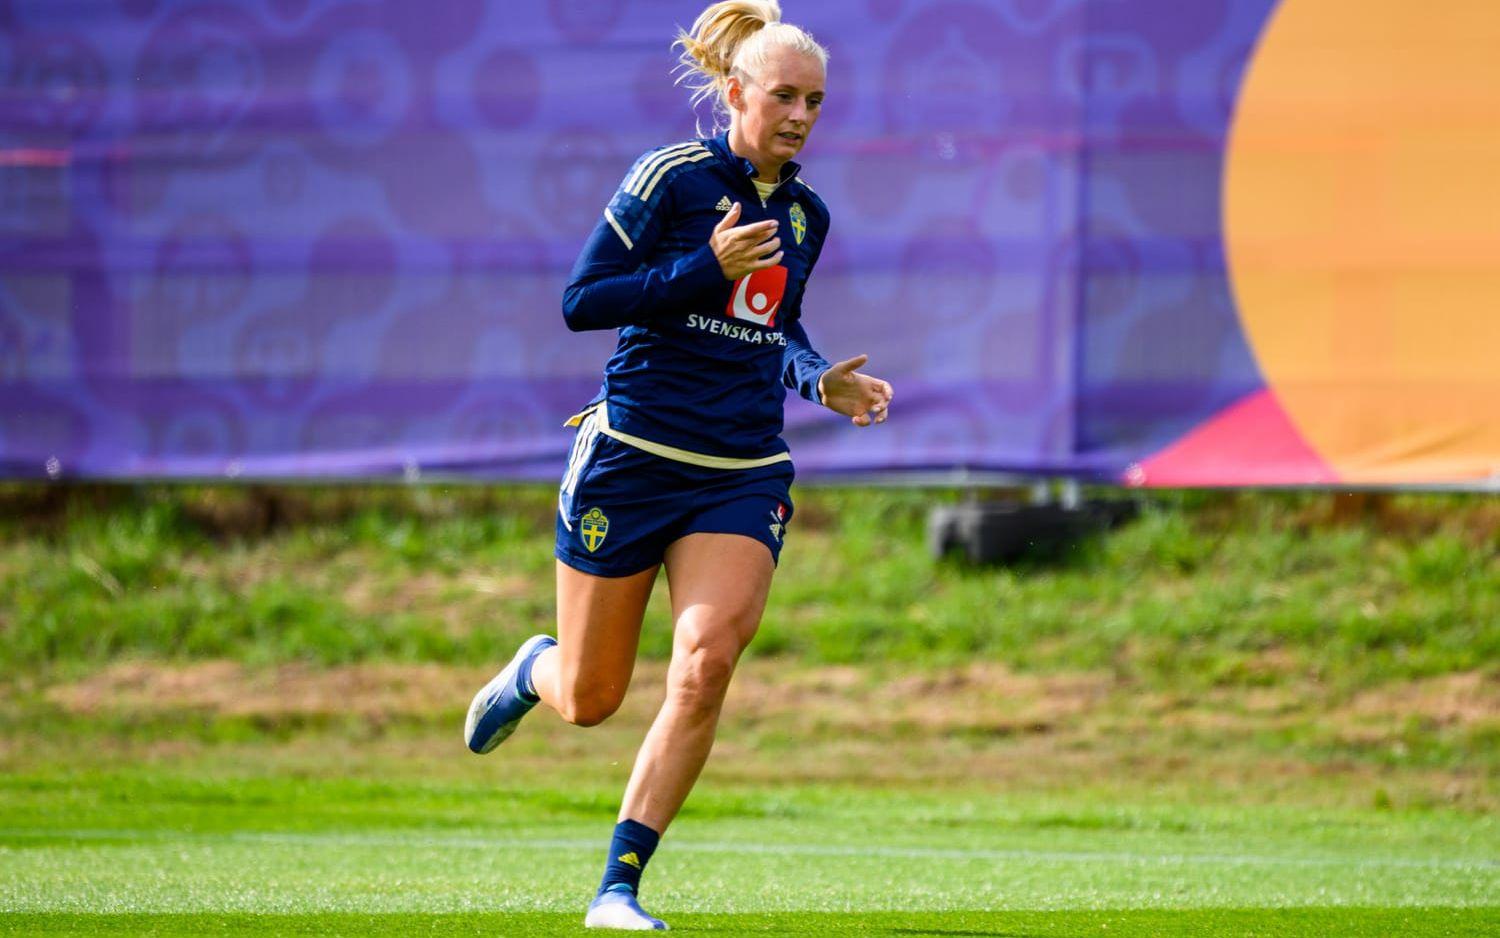 220703 Stina Blackstenius does rehab during a training session with the the women&apos;s Swedish national football team ahead of UEFA Women&apos;s Euro 2022 Championship on July 3, 2022 in Chester. Photo: Ludvig Thunman / BILDBYRÅN / kod LT / LT0343